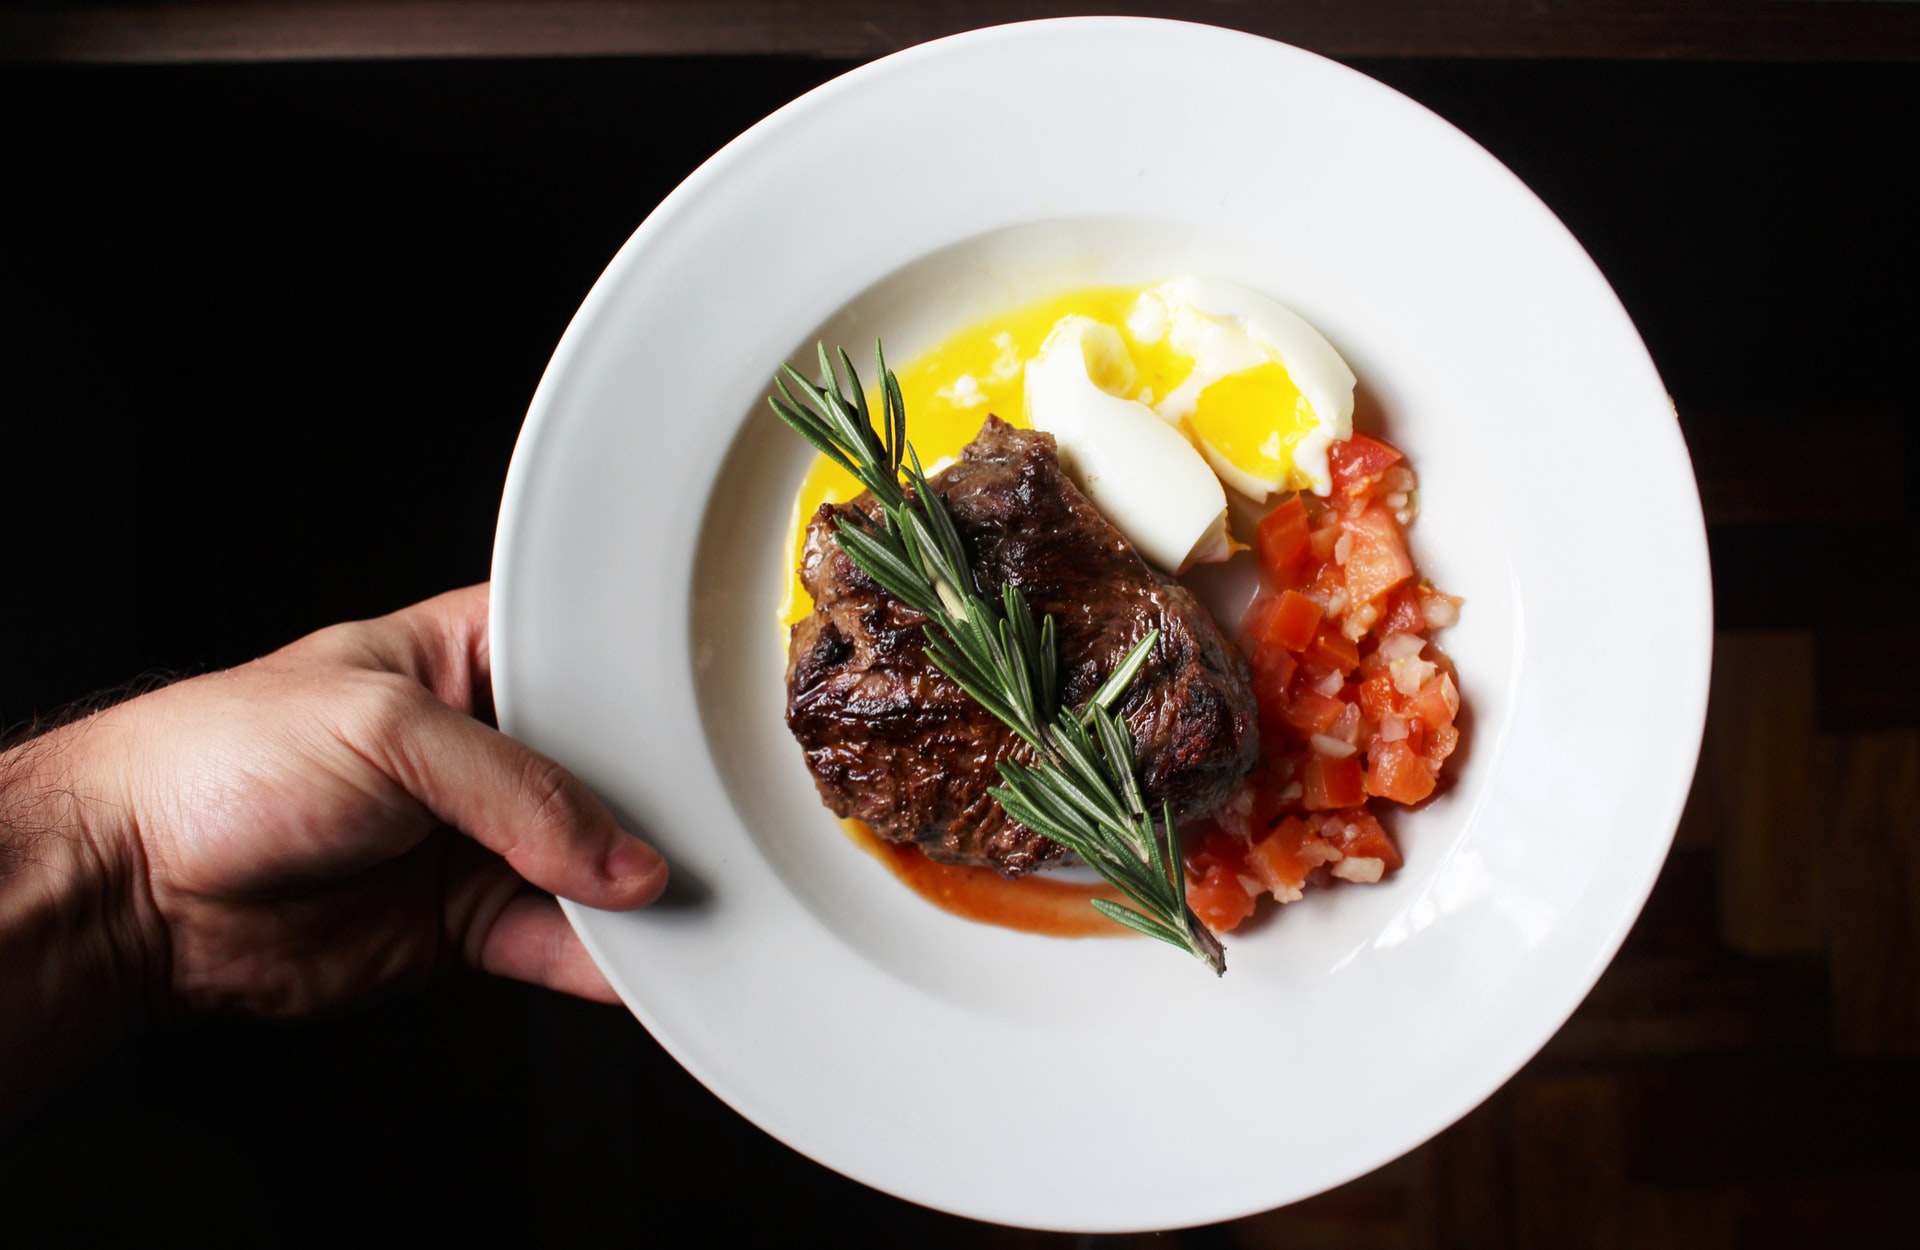 A white hand holding a white flat plate filled with meat, some eggs, and vegetables